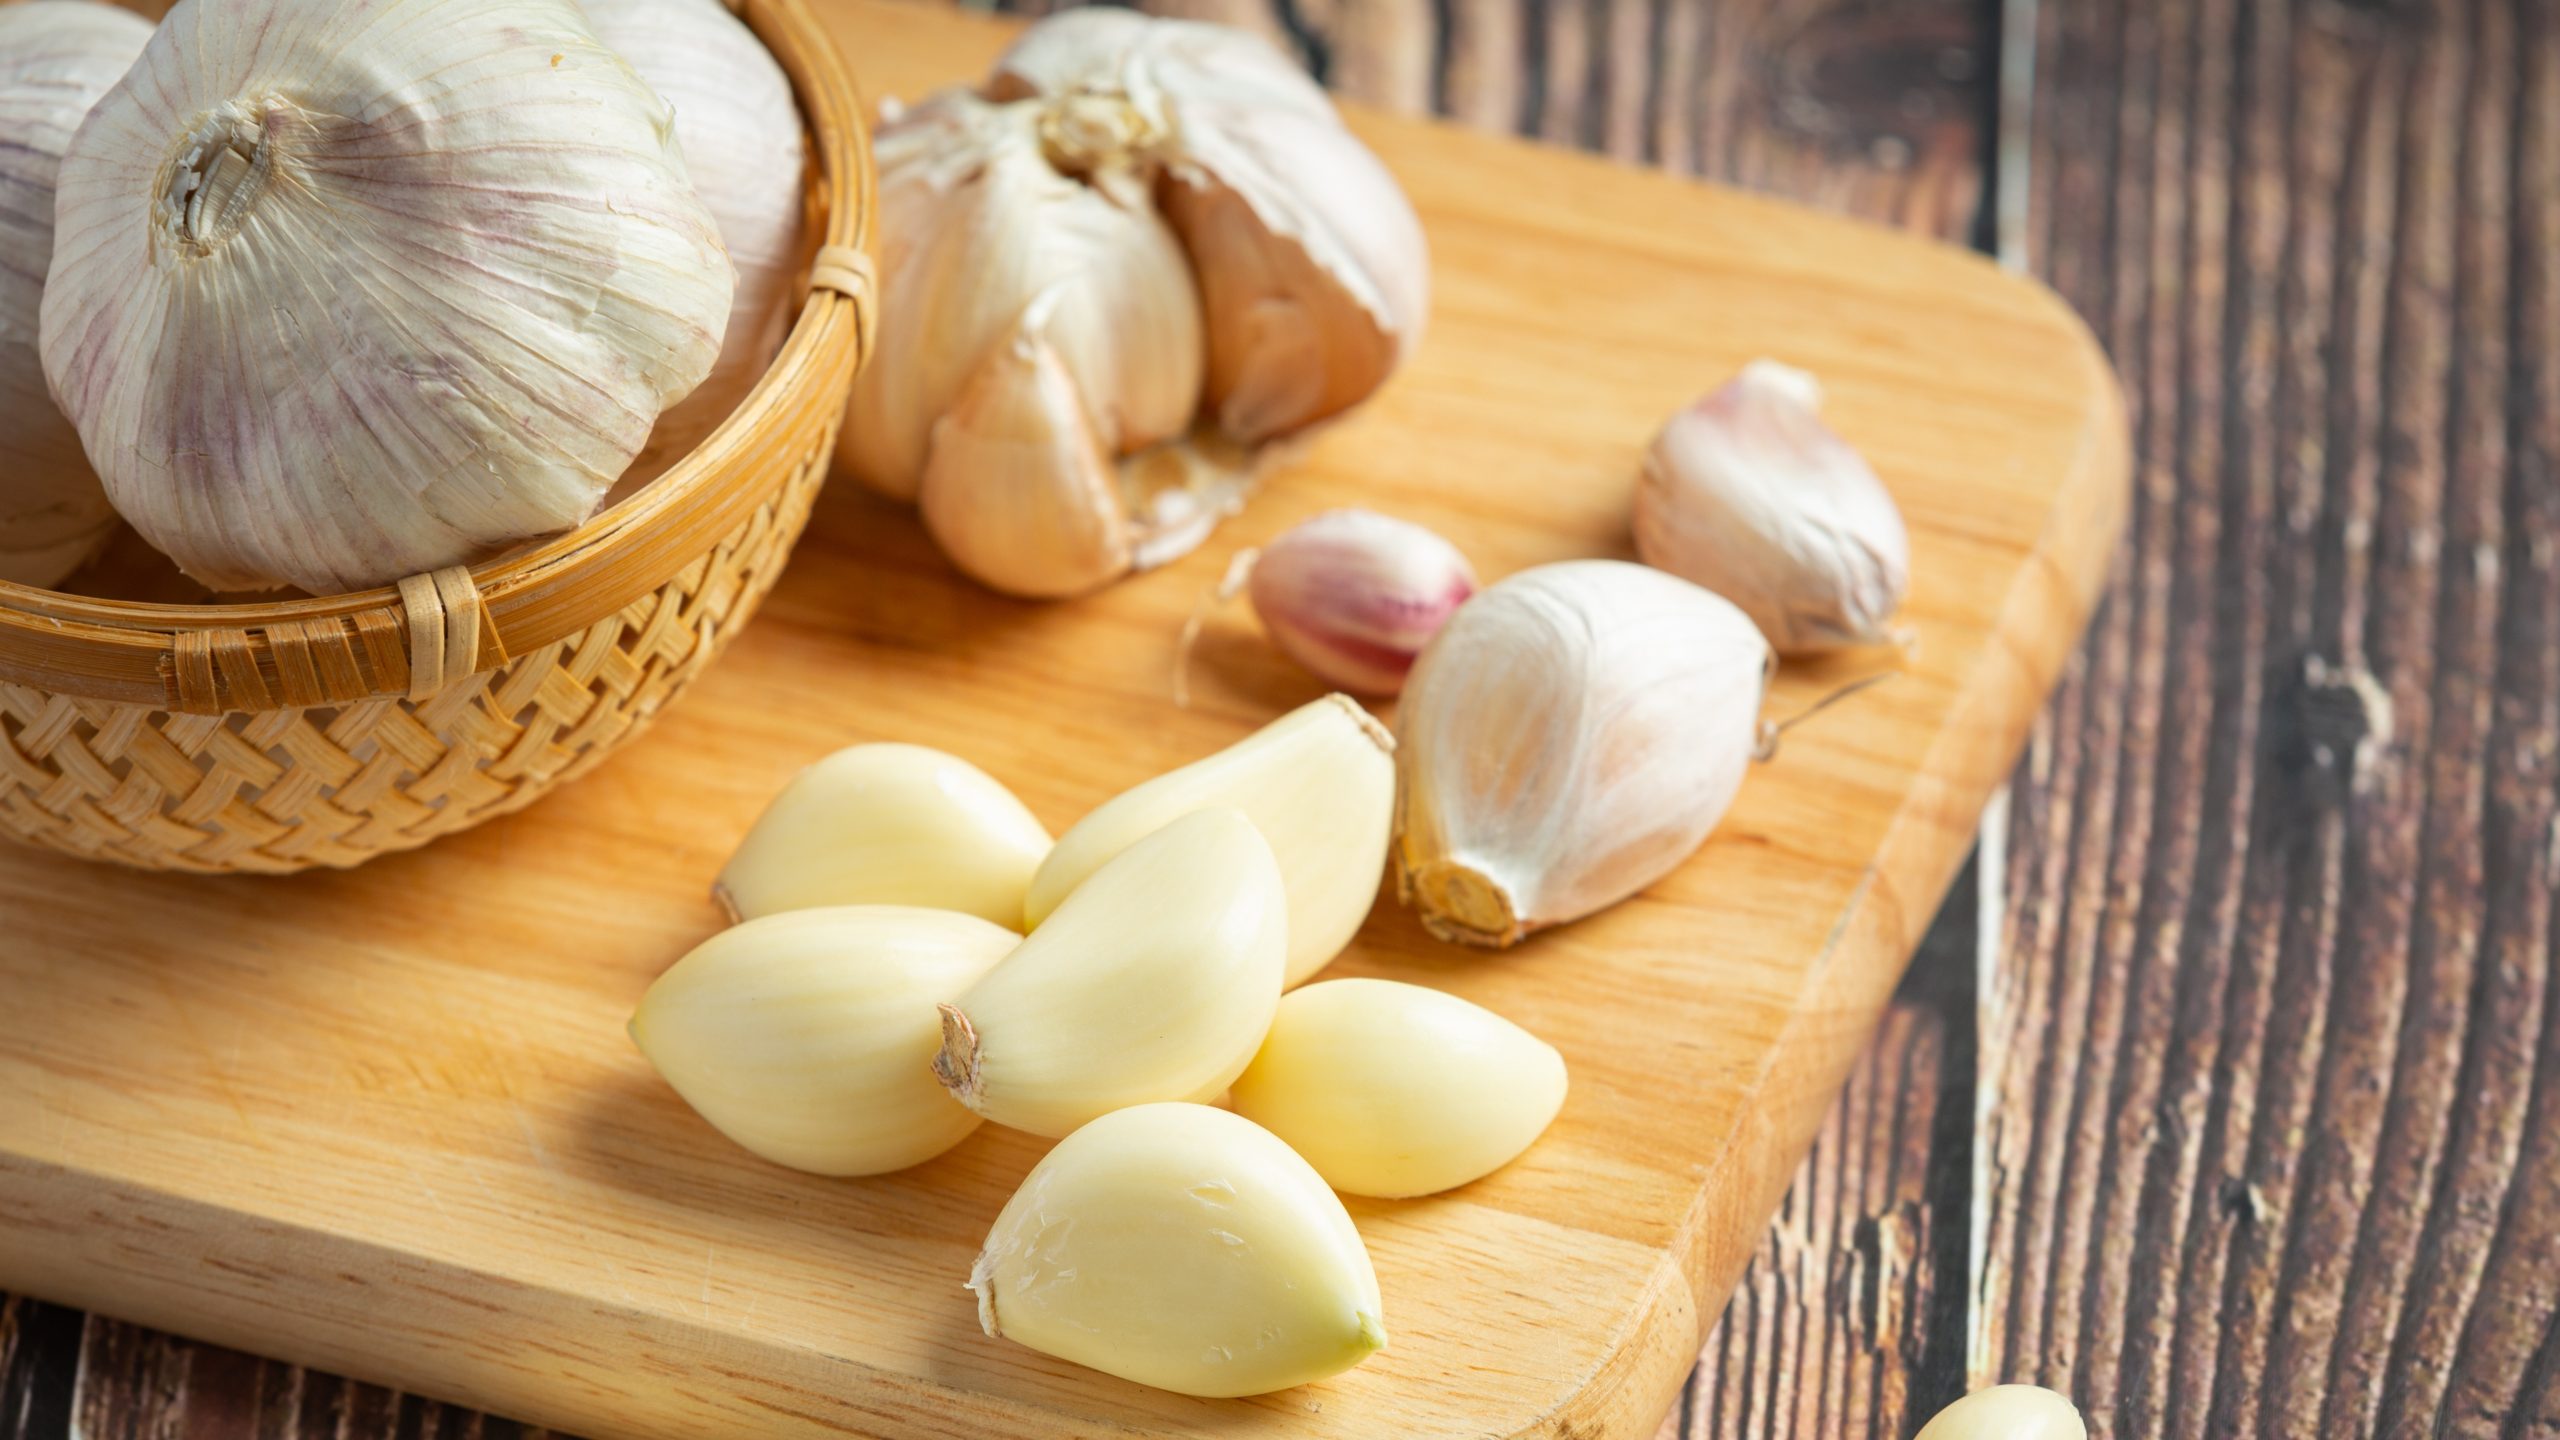 10 Ways to Improve Your Life With Garlic